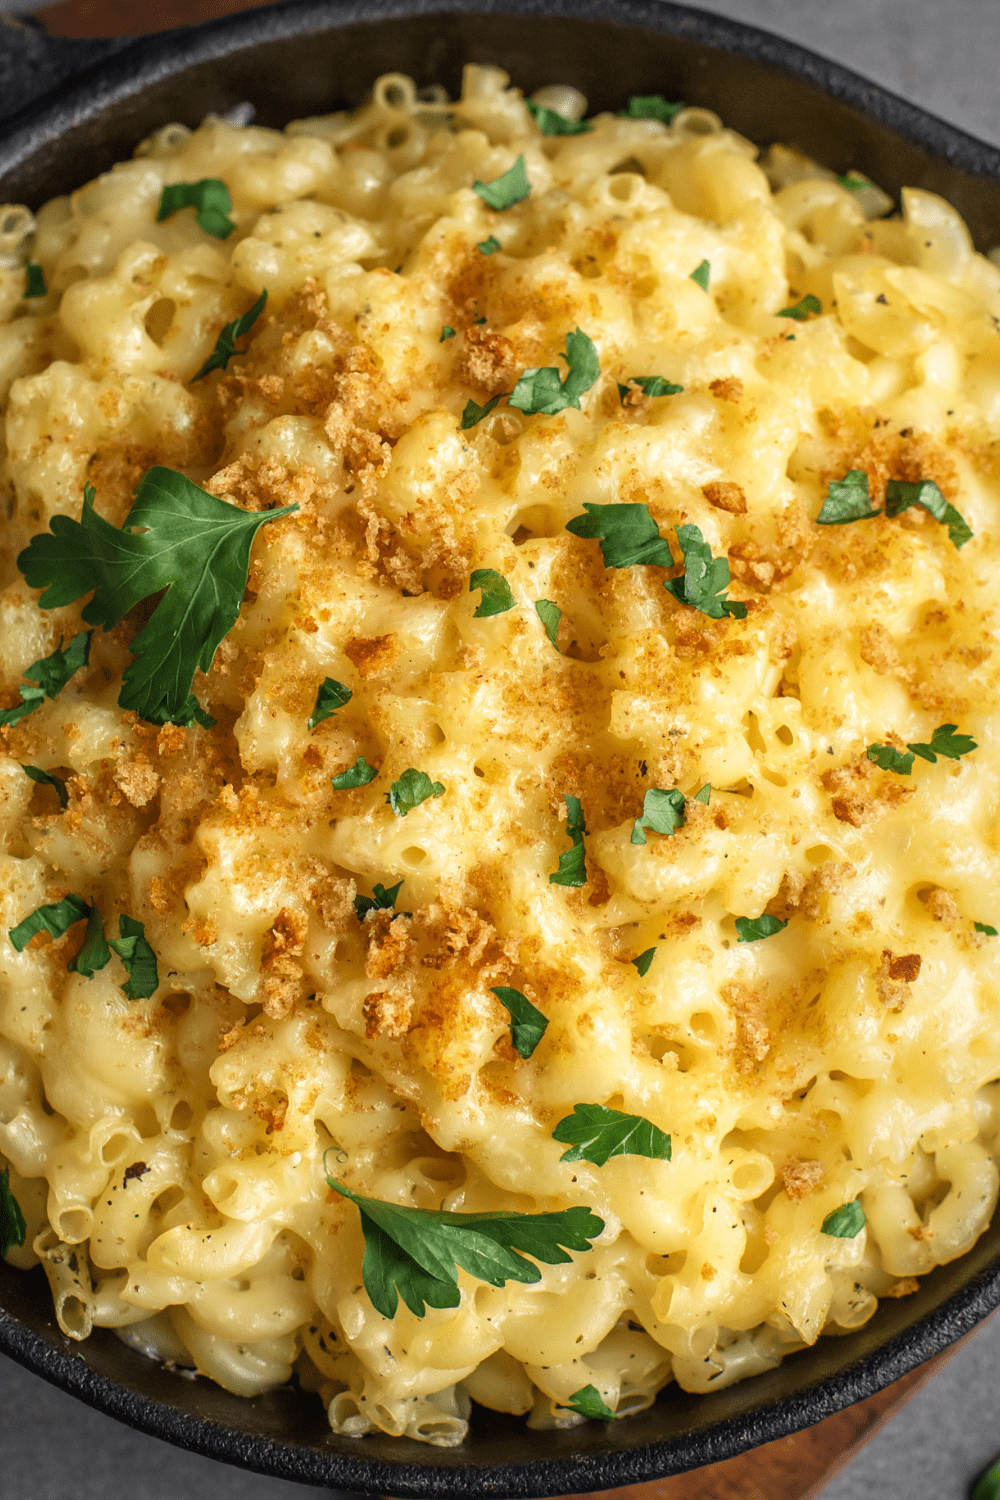 Mac And Cheese With Bread Crumbs And Cheese Sauce